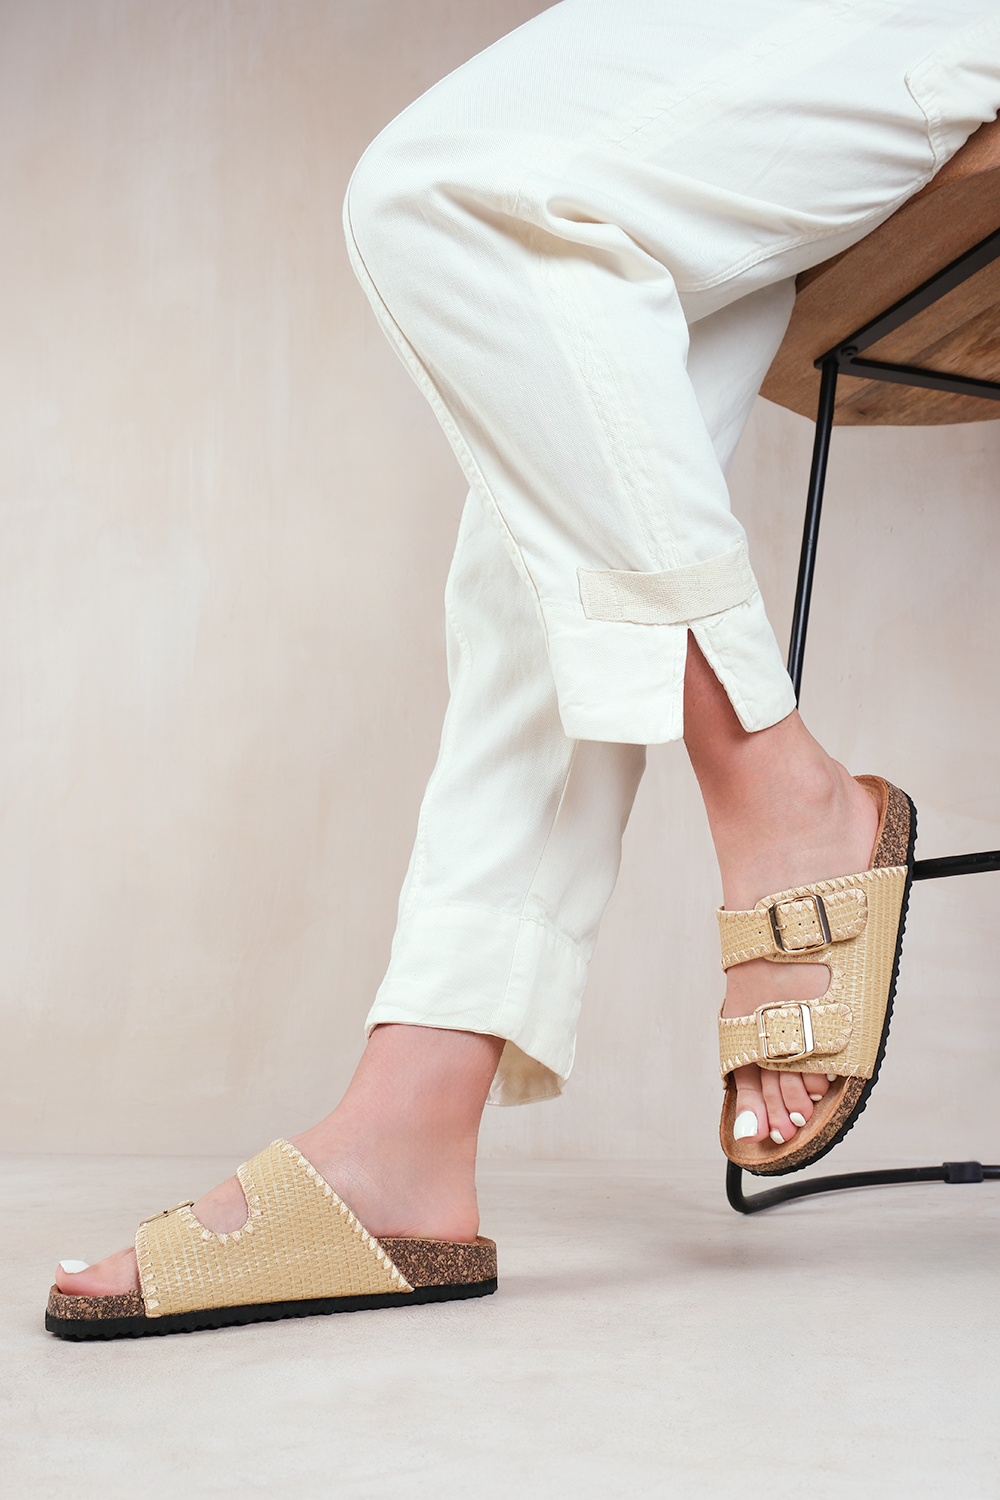 SUNSET DOUBLE STRAP FLAT SANDALS WITH BUCKLE DETAIL IN KHAKI FAUX LEATHER